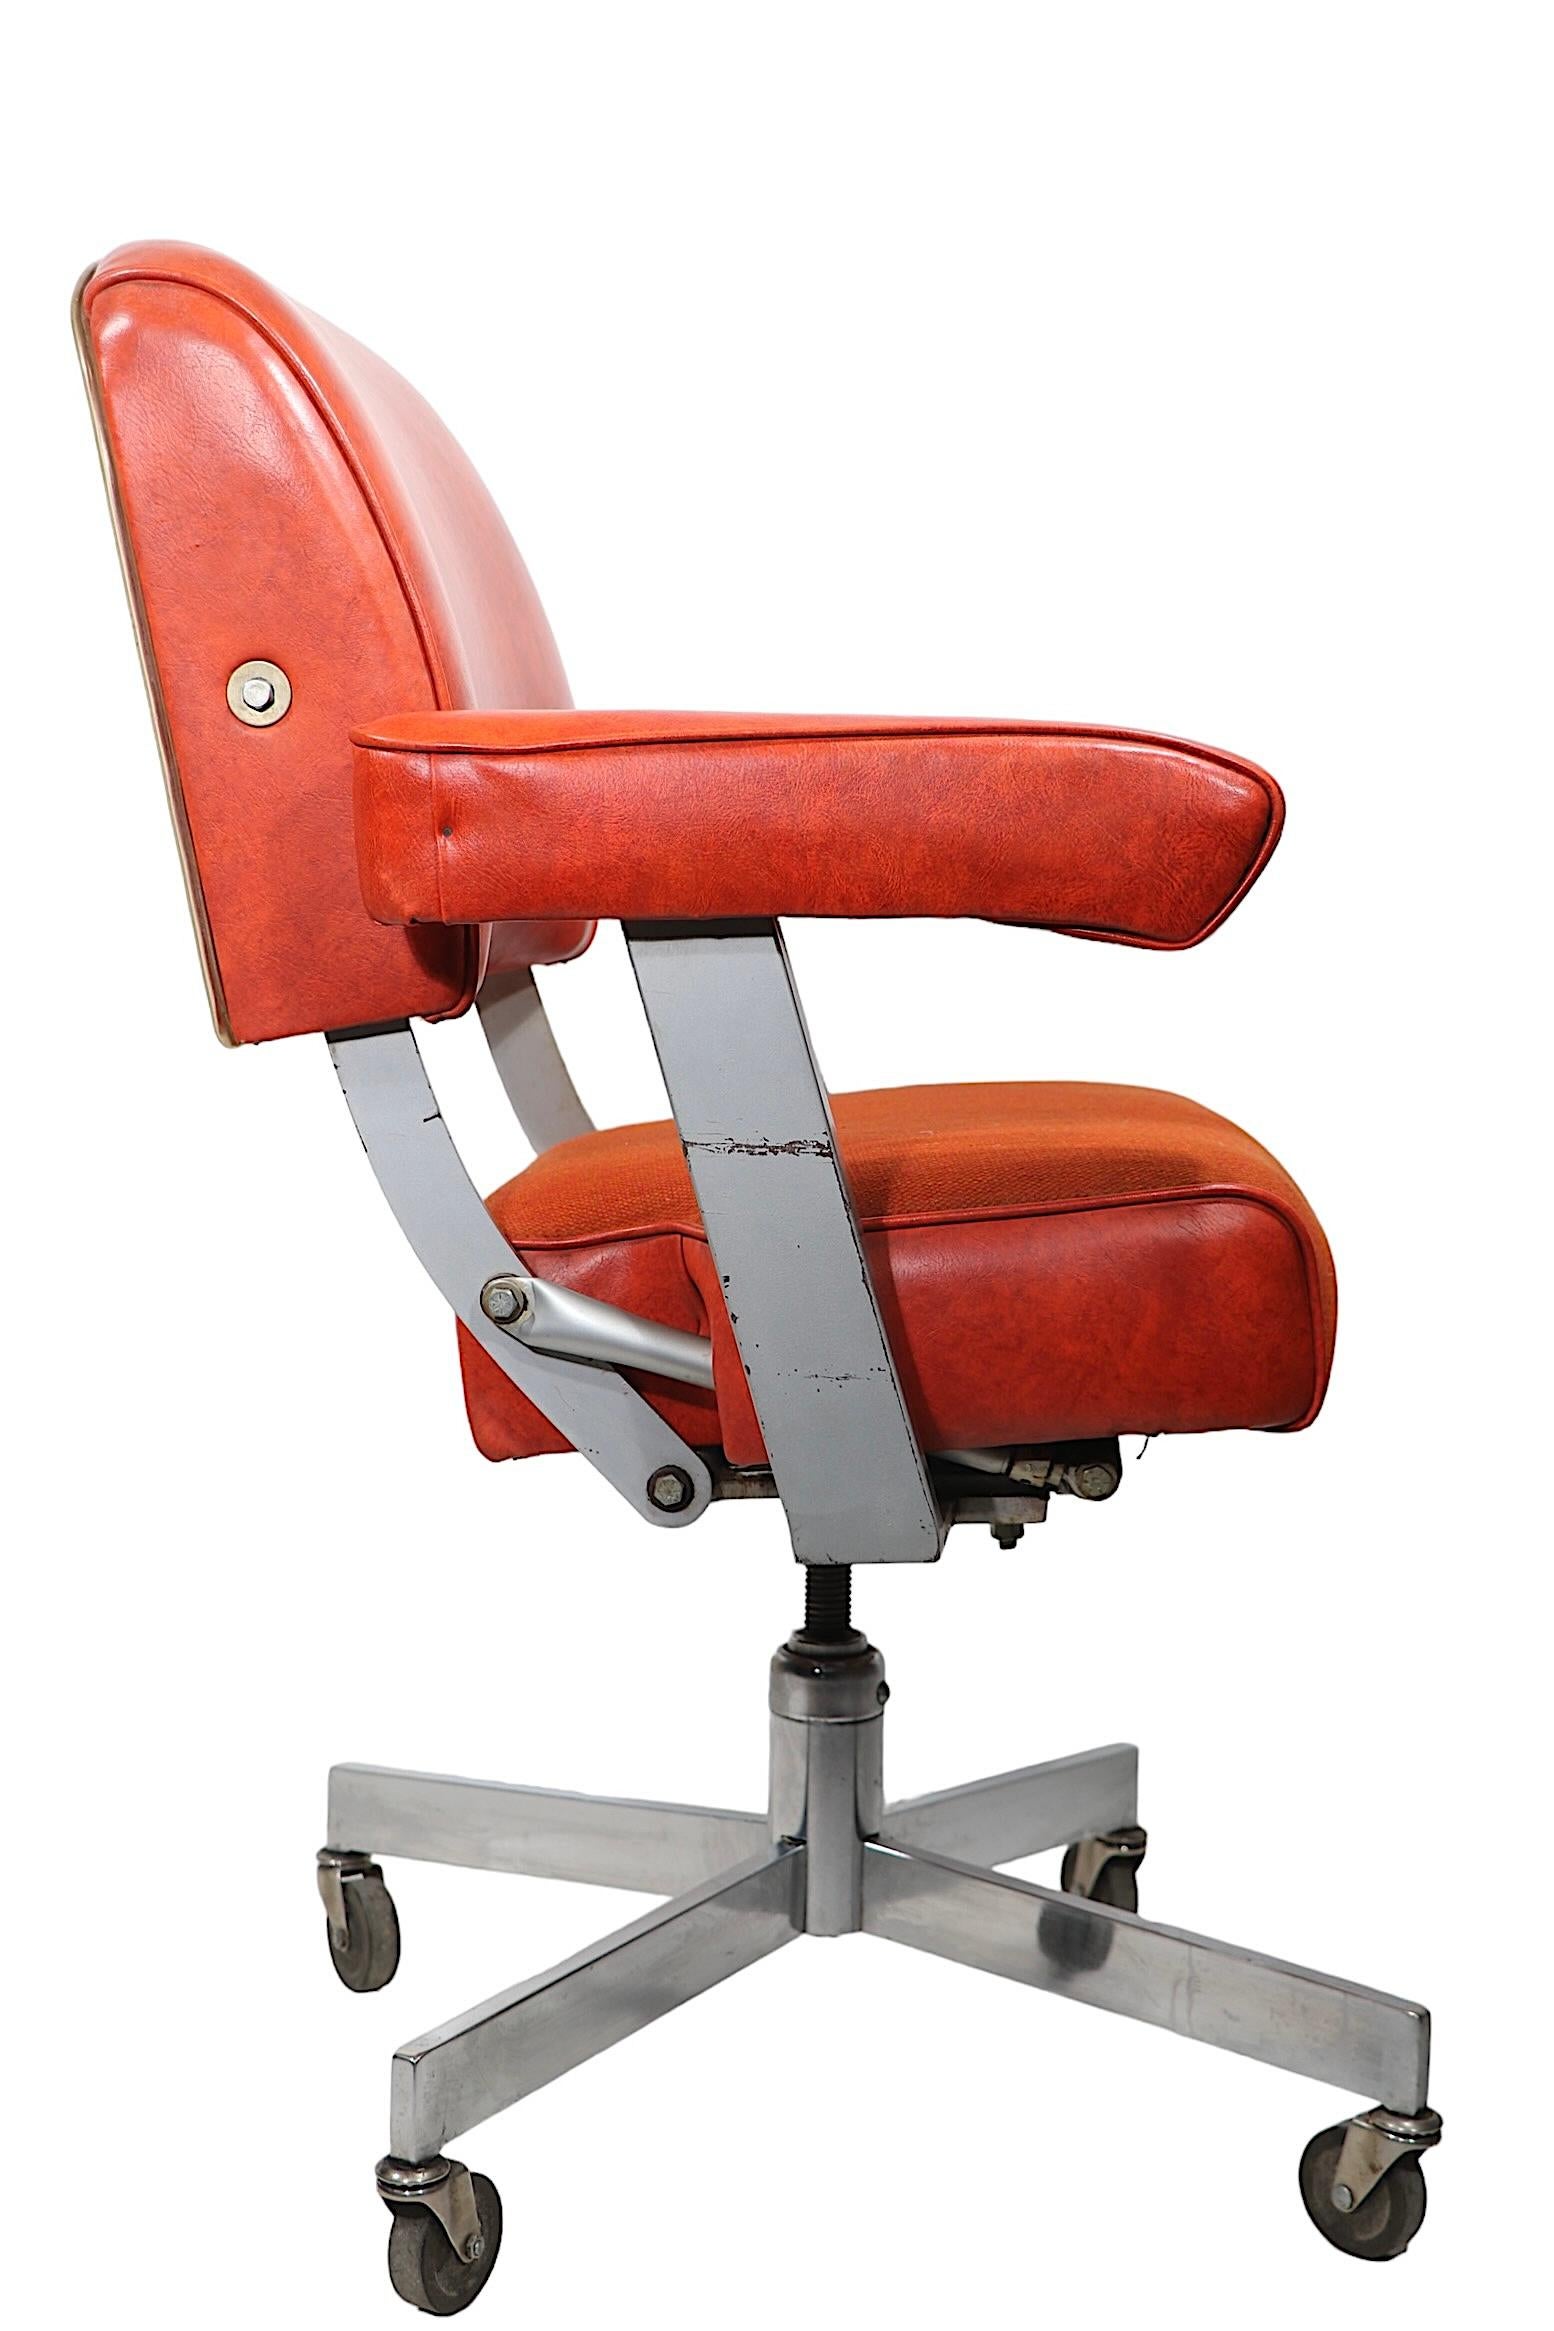 Steel Executive Model DoMore Swivel Desk Office Chair Model 616 c 1950/1960's  For Sale